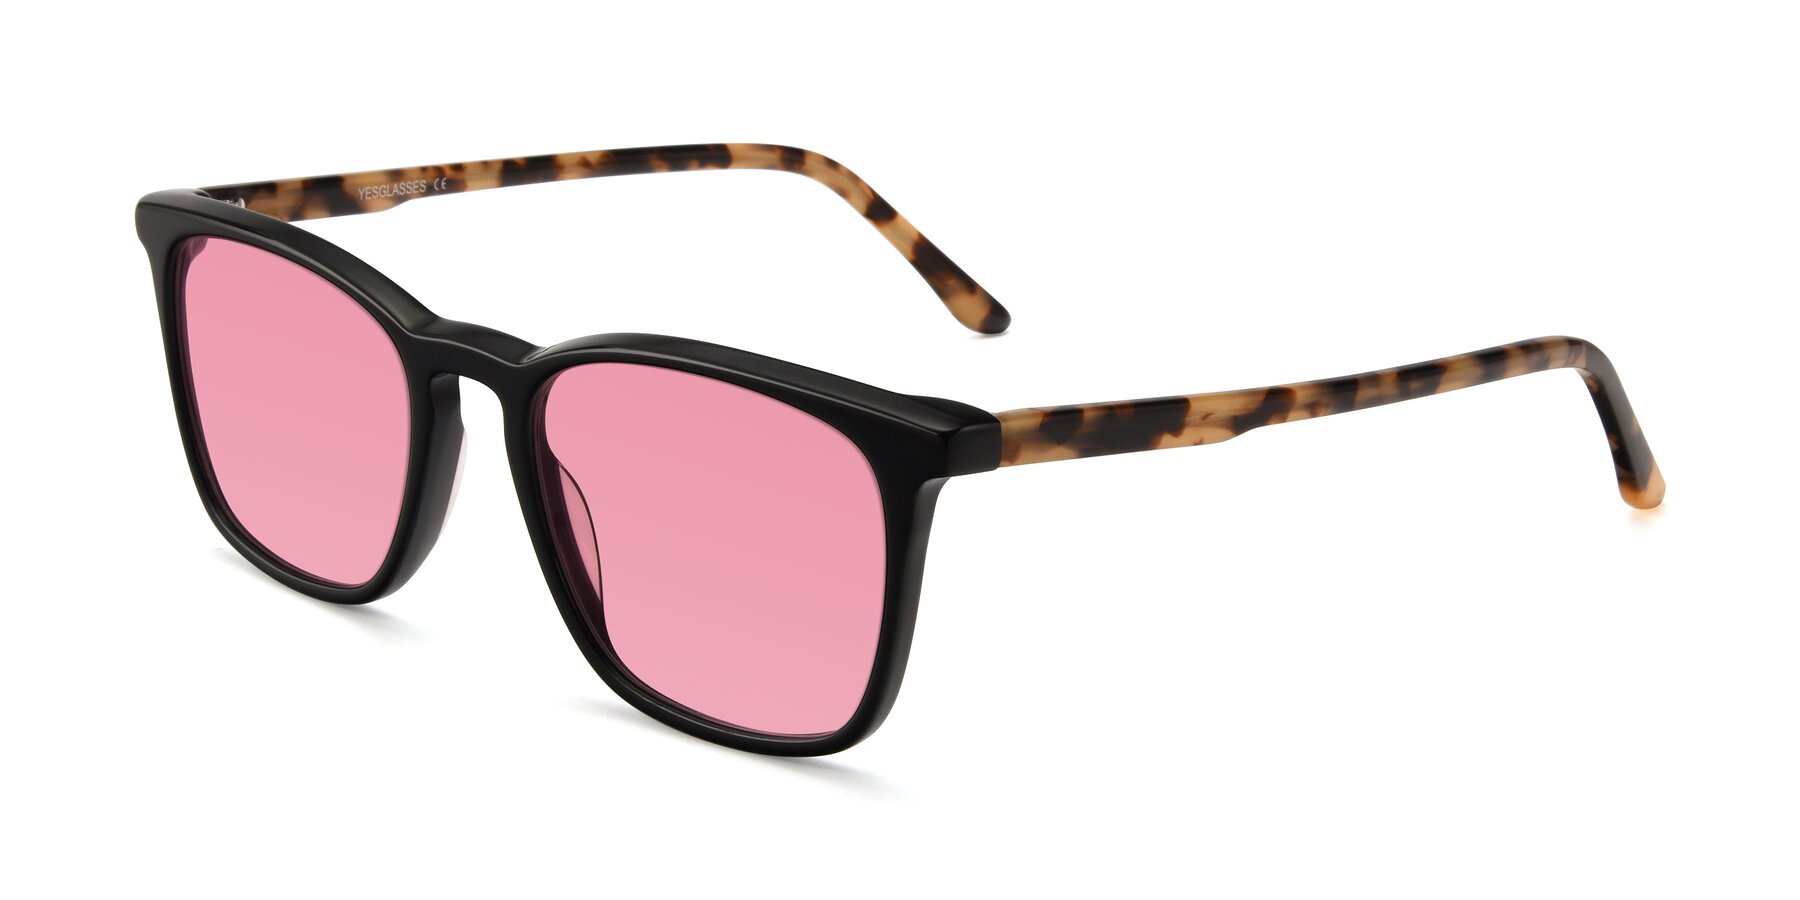 Angle of Vigor in Black-Tortoise with Pink Tinted Lenses